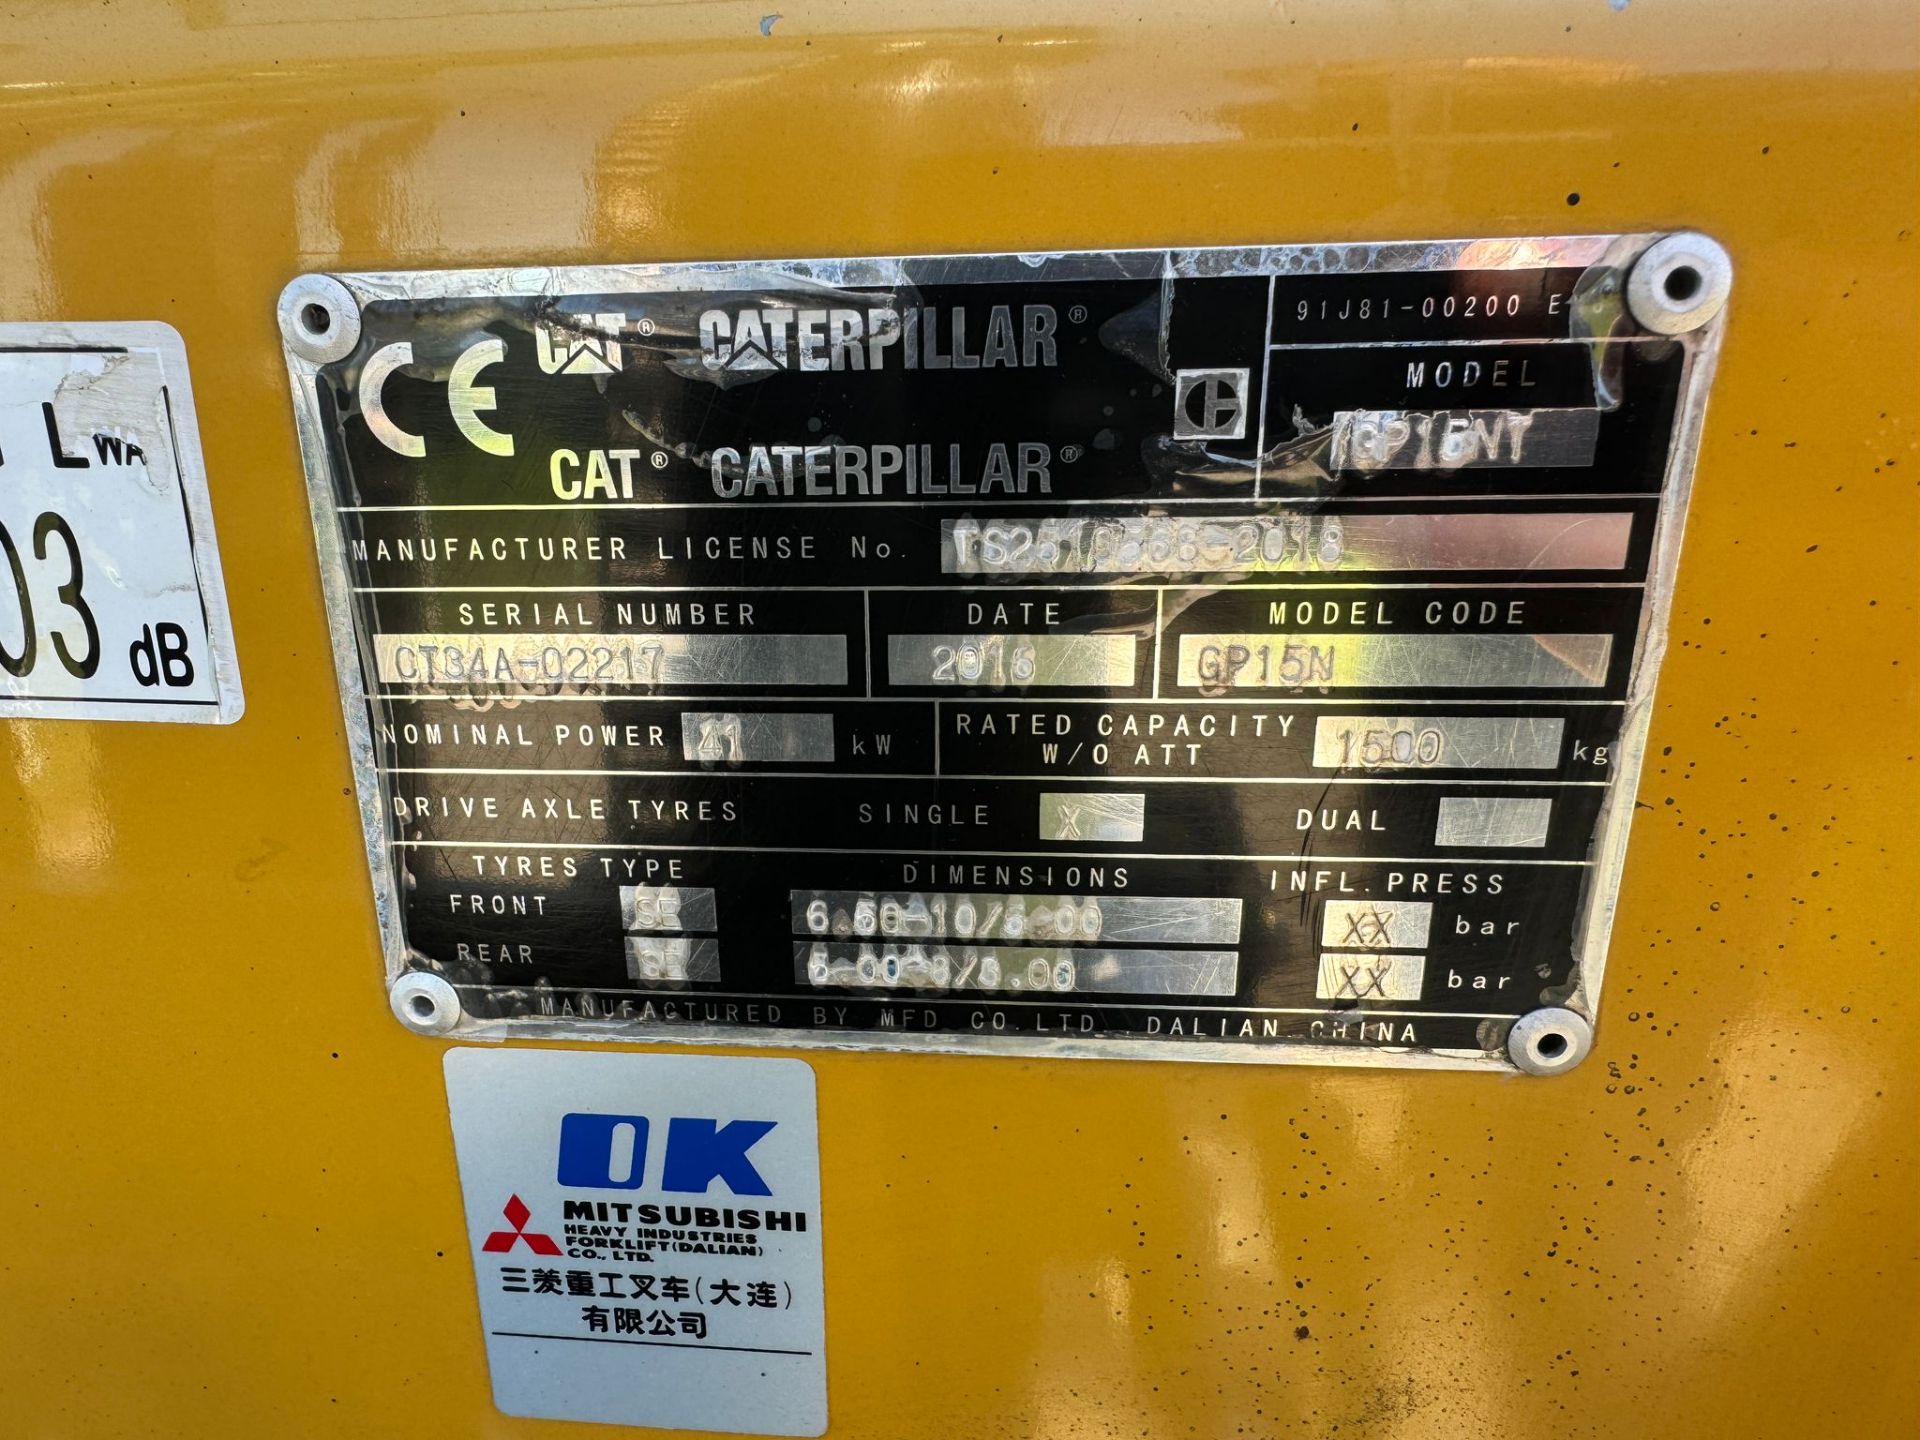 2016, CATERPILLAR - 1.5 Tonne Gas Forklift (Container / Triple Mast) - 3400 Hours - Image 7 of 7